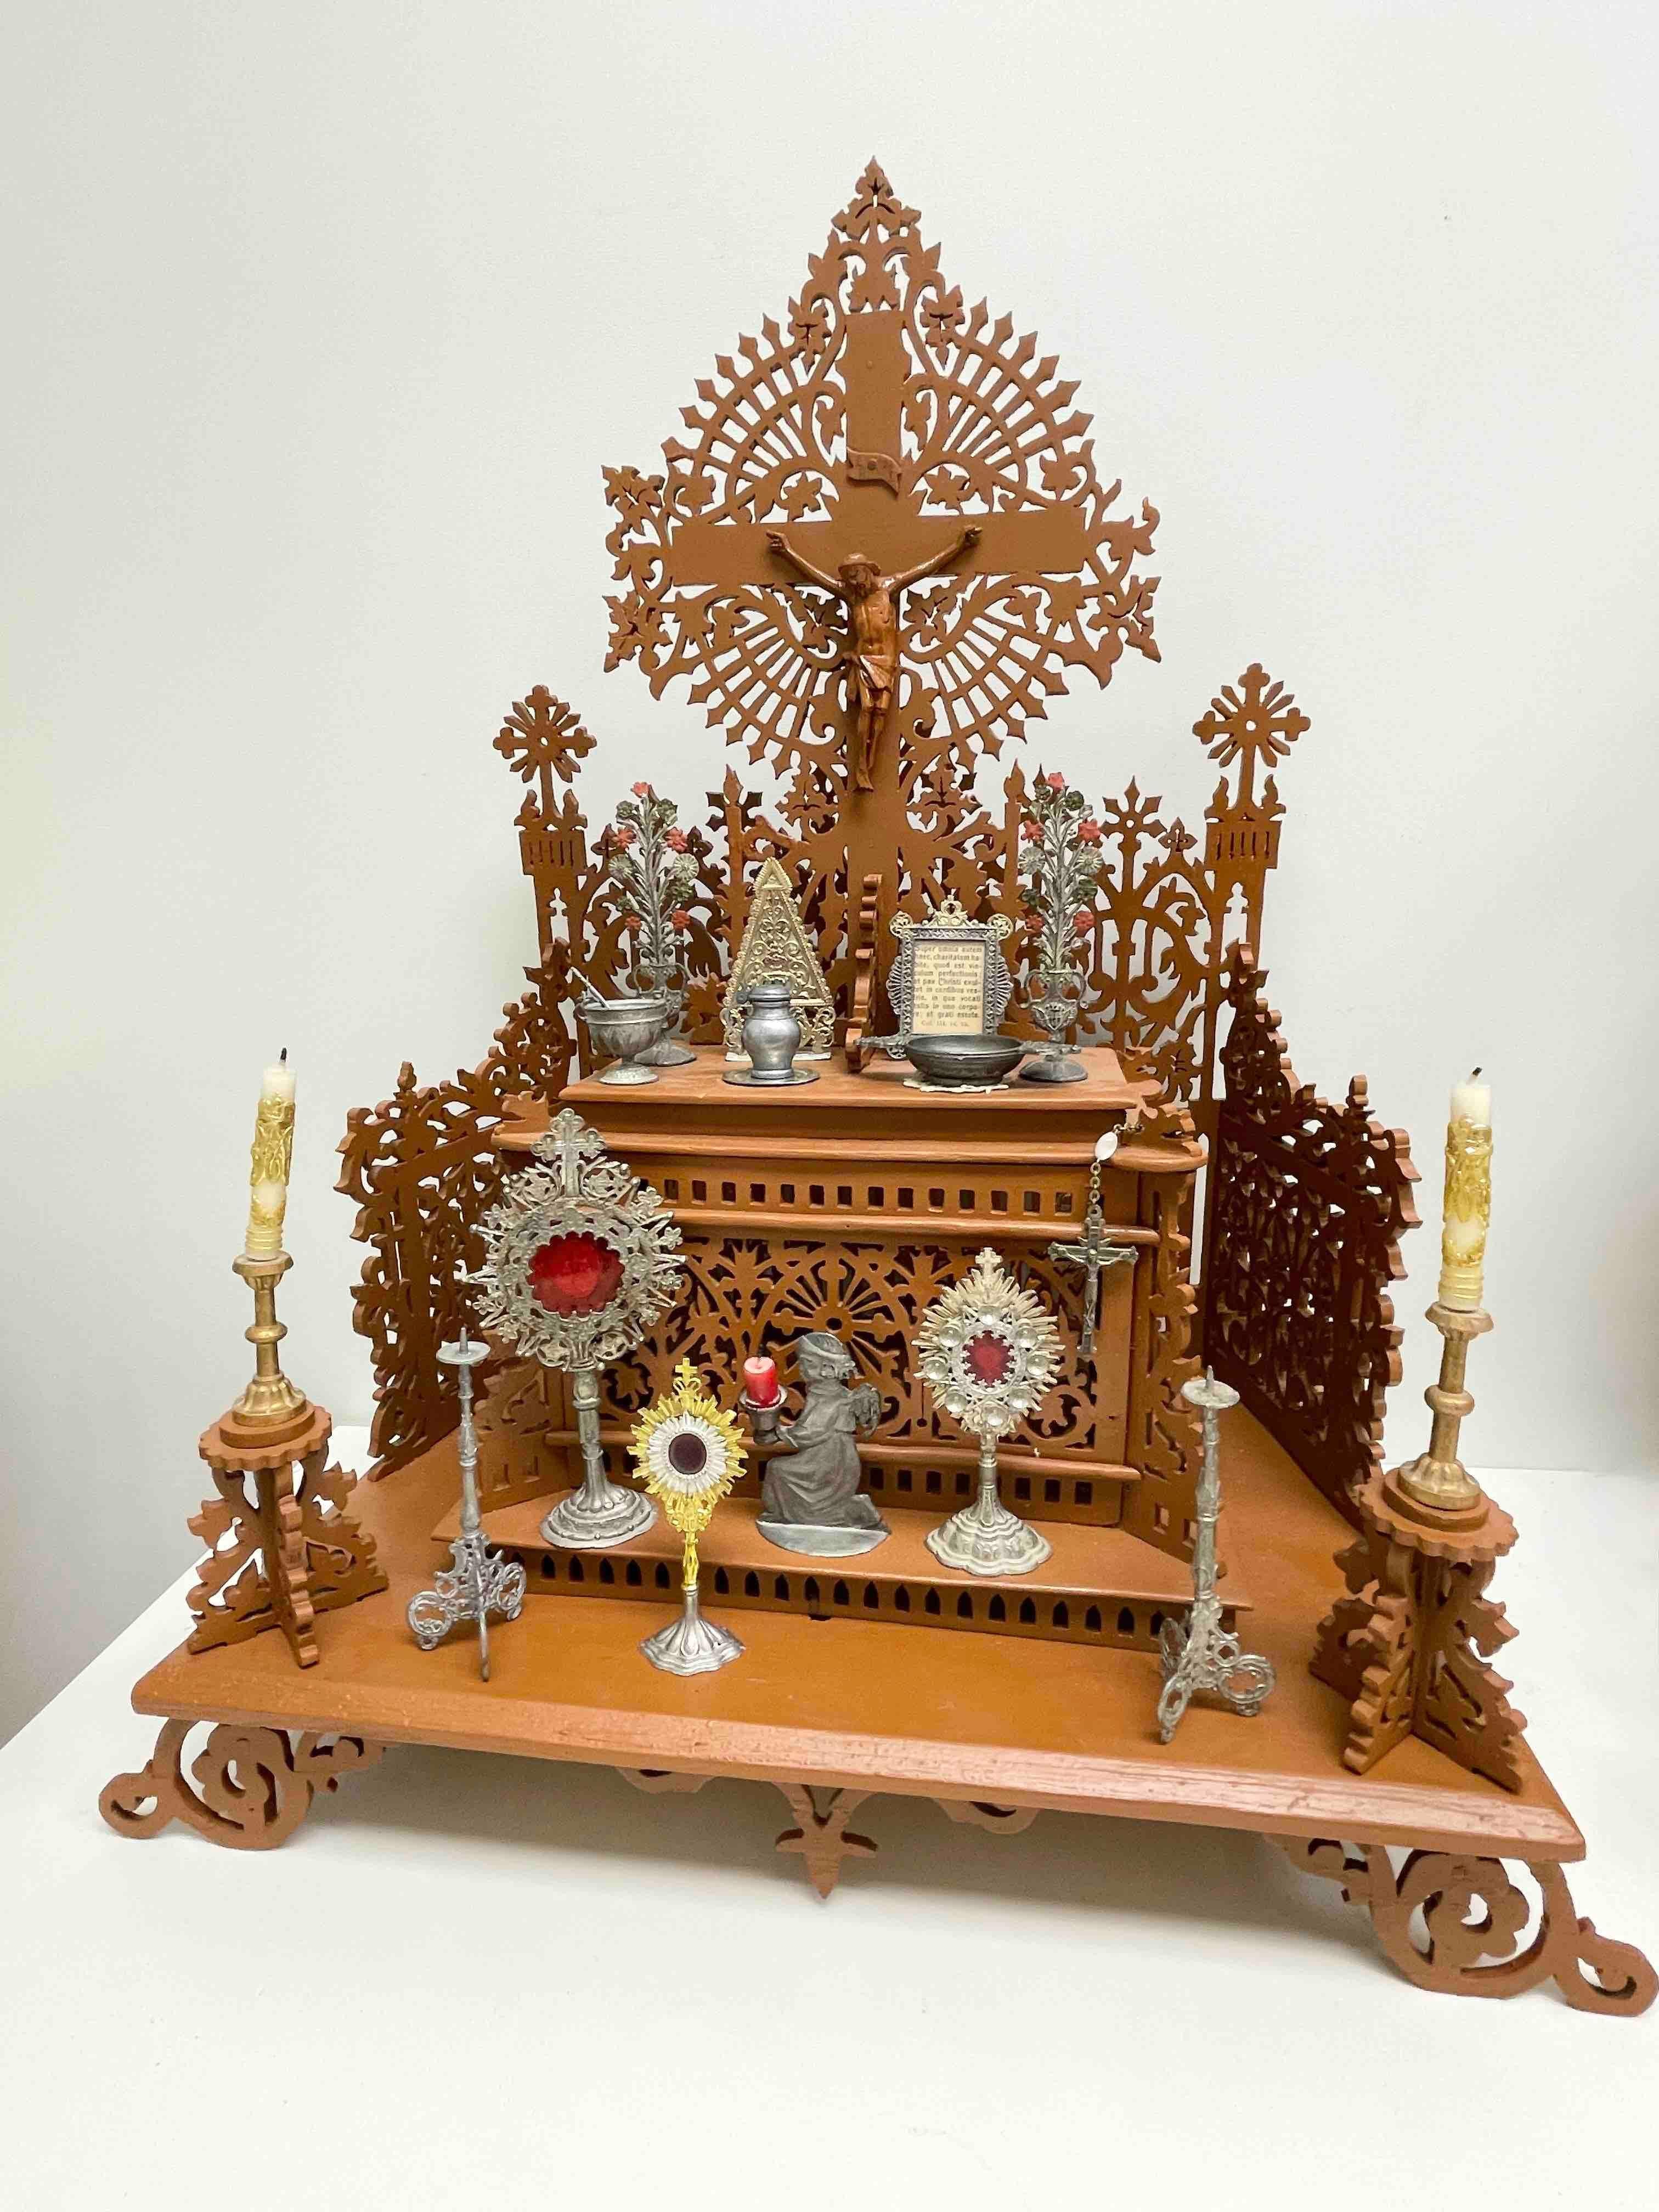 Here I have to offer a fine antique classic early 20th century fretwork hand crafted House Altar with a lot of Christianity miniatures and accessories. A wonderful decorative appeal! 
This is a truly a fine older piece. Great Item in your home. As